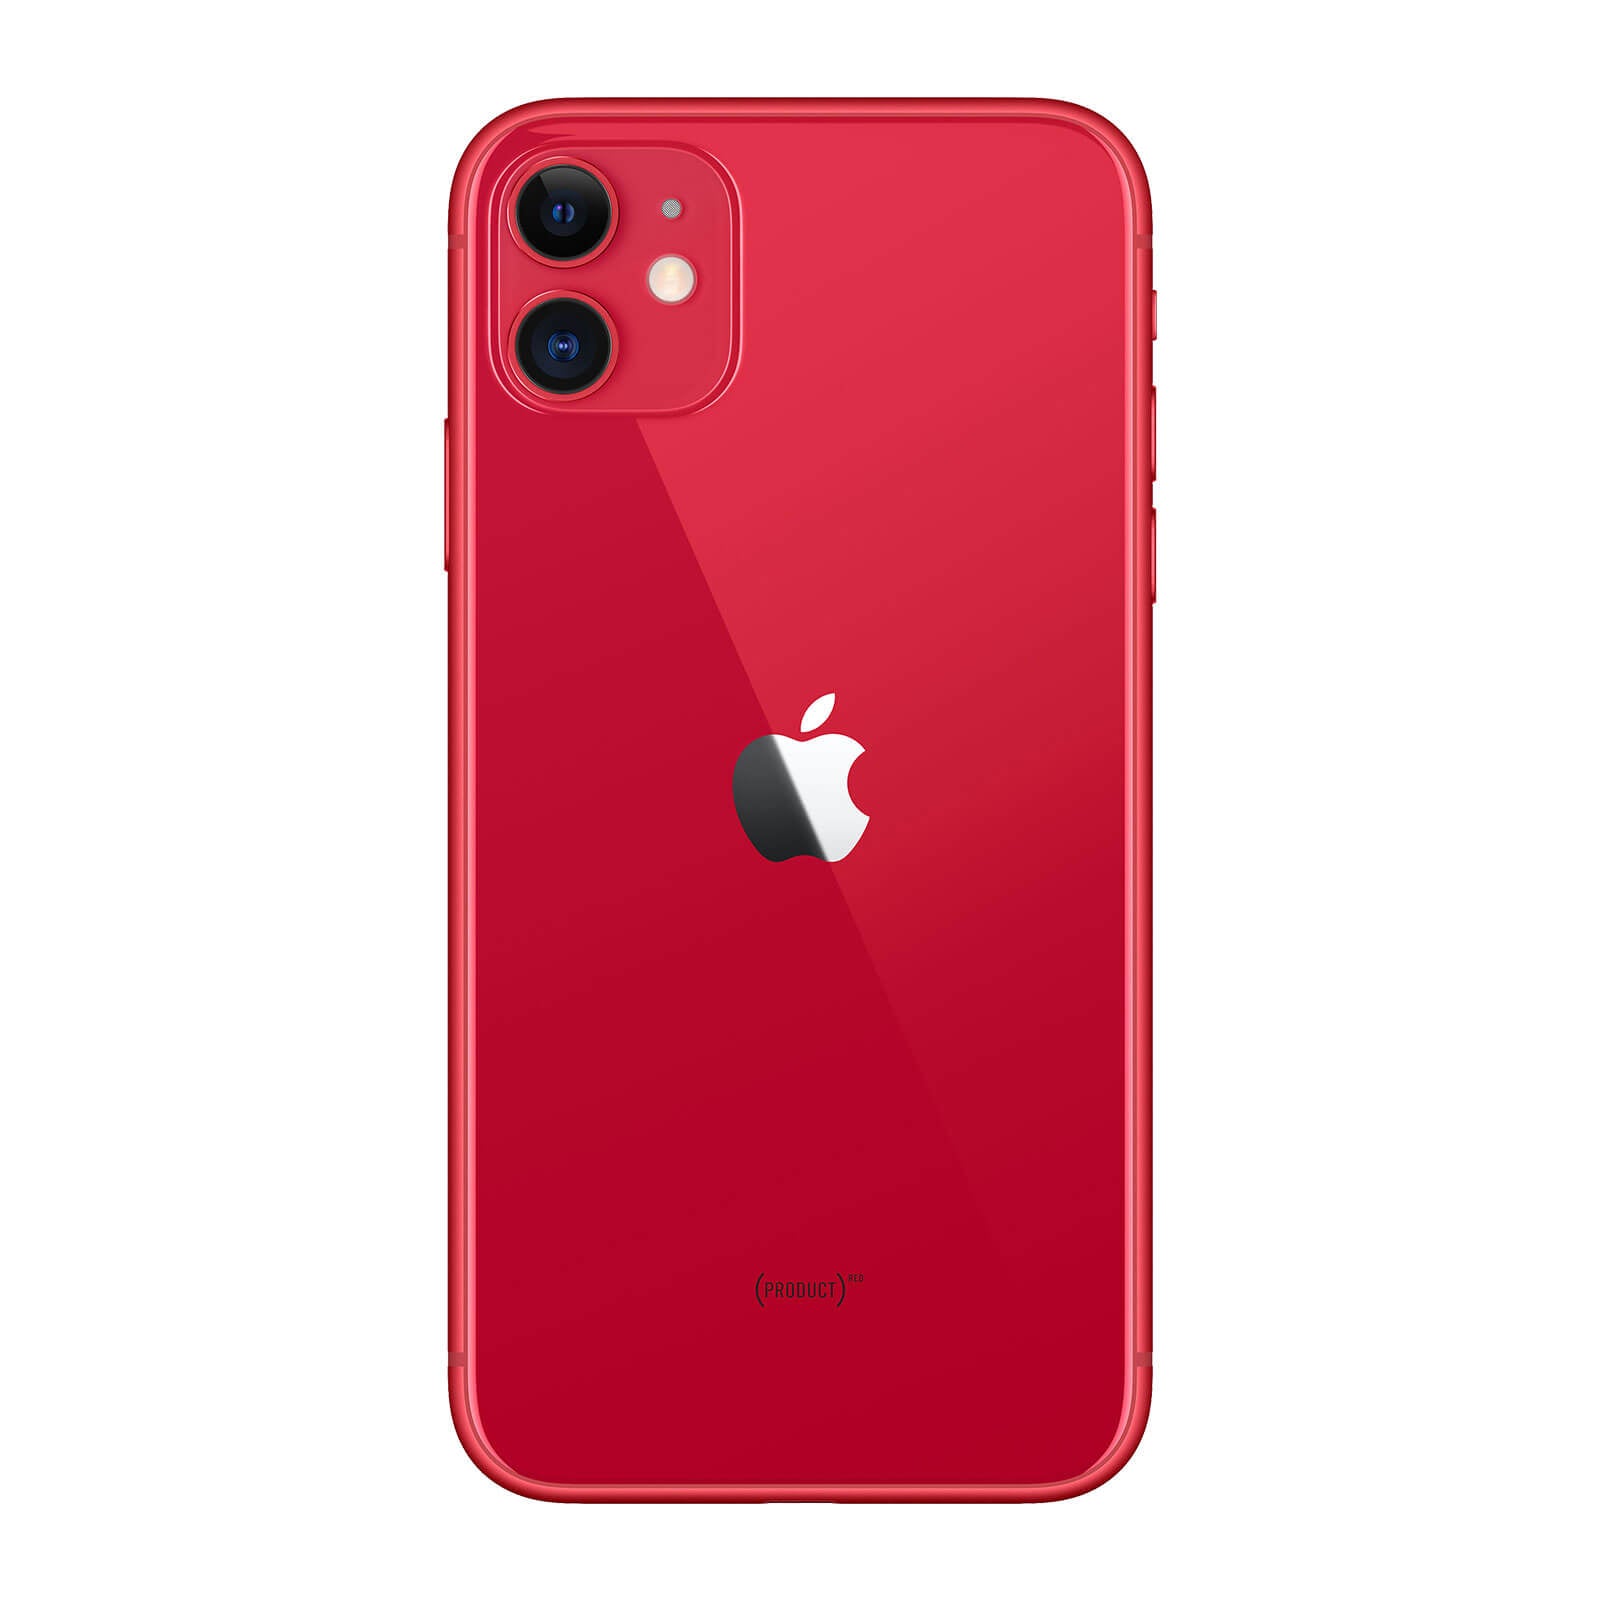 Apple iPhone 11 64GB Product Red Pristine - AT&T